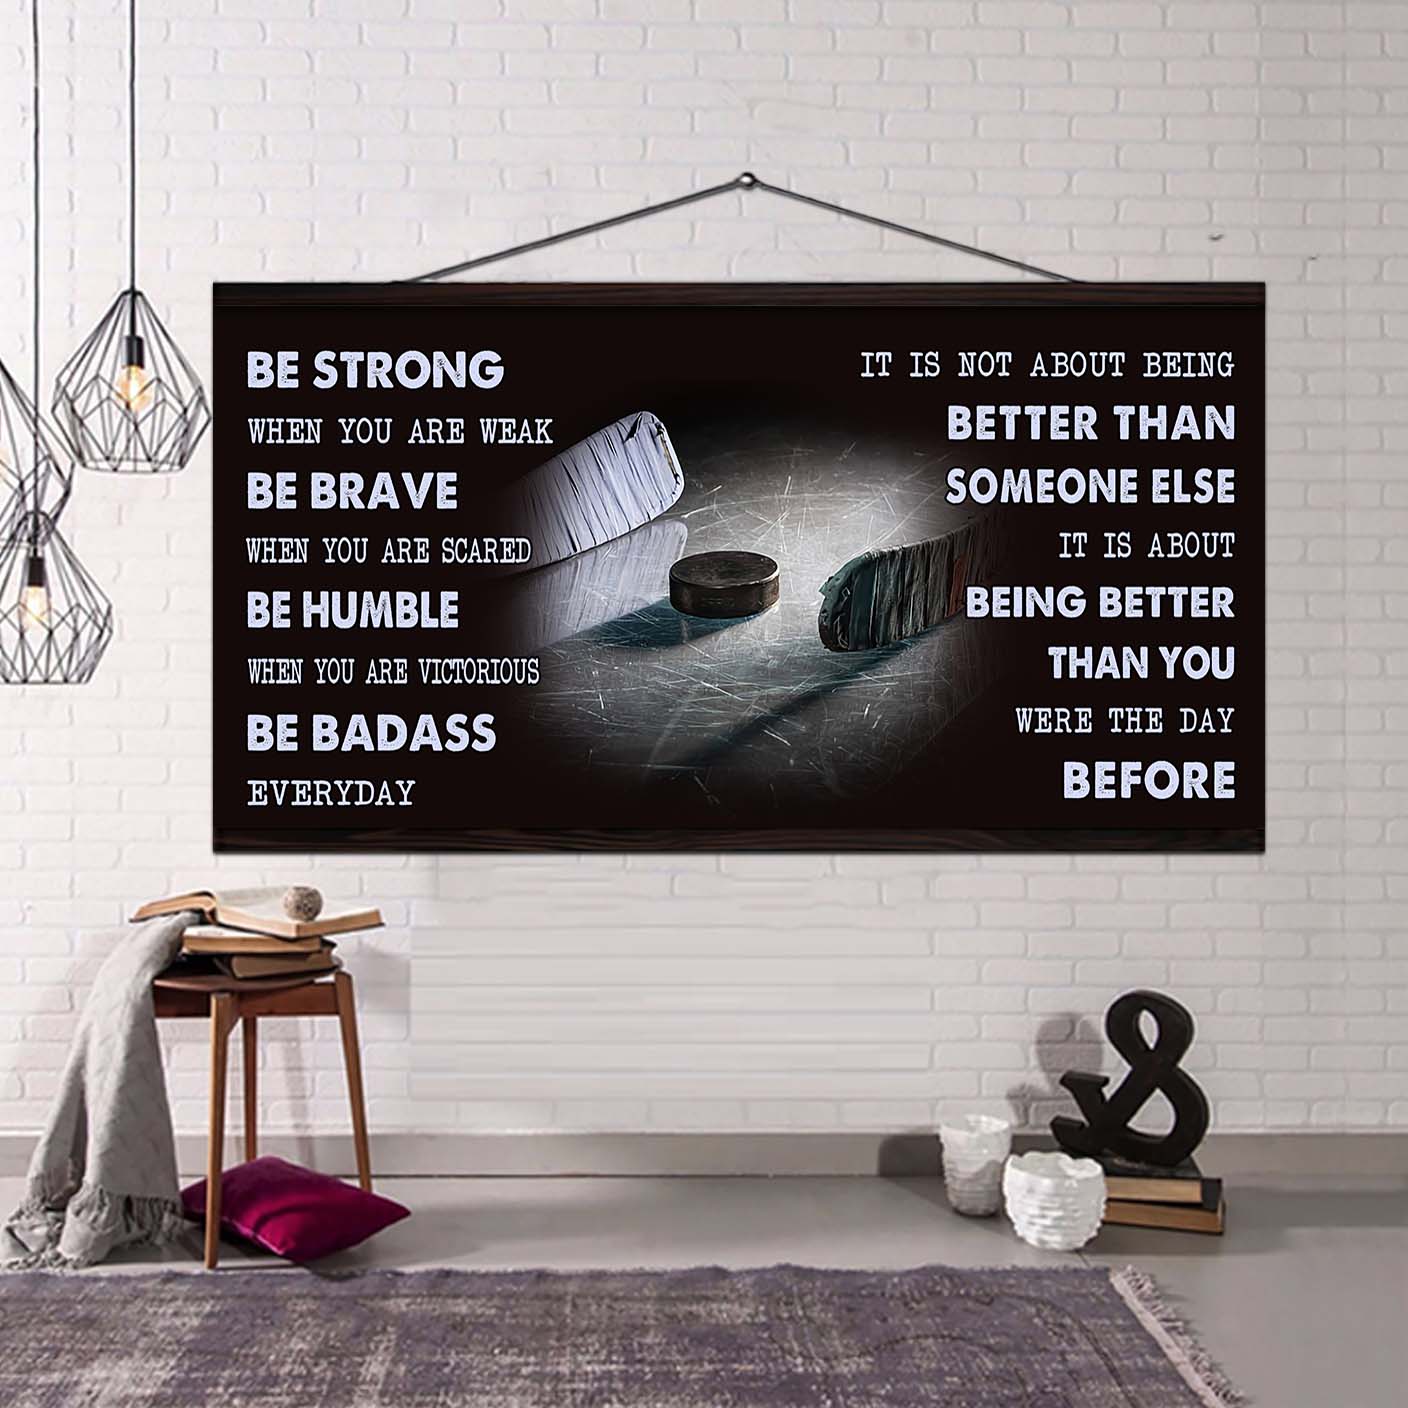 Baseball canvas It Is Not About Being Better Than Someone Else - Be Strong When You Are Weak